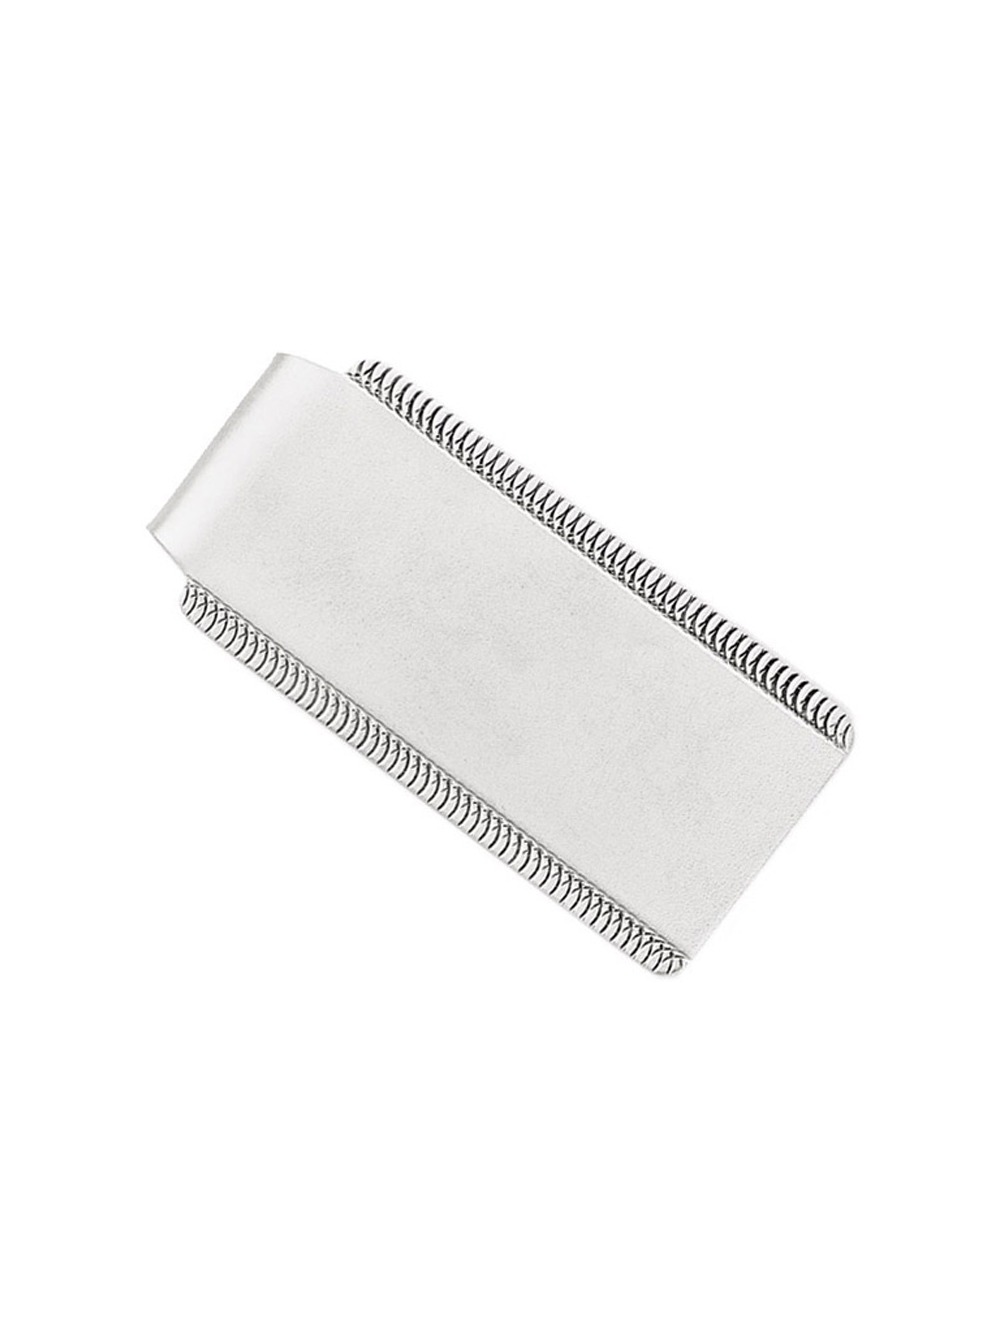 Mens Rhodium-Plated Satin Money Clip in Sterling Silver - image 1 of 3